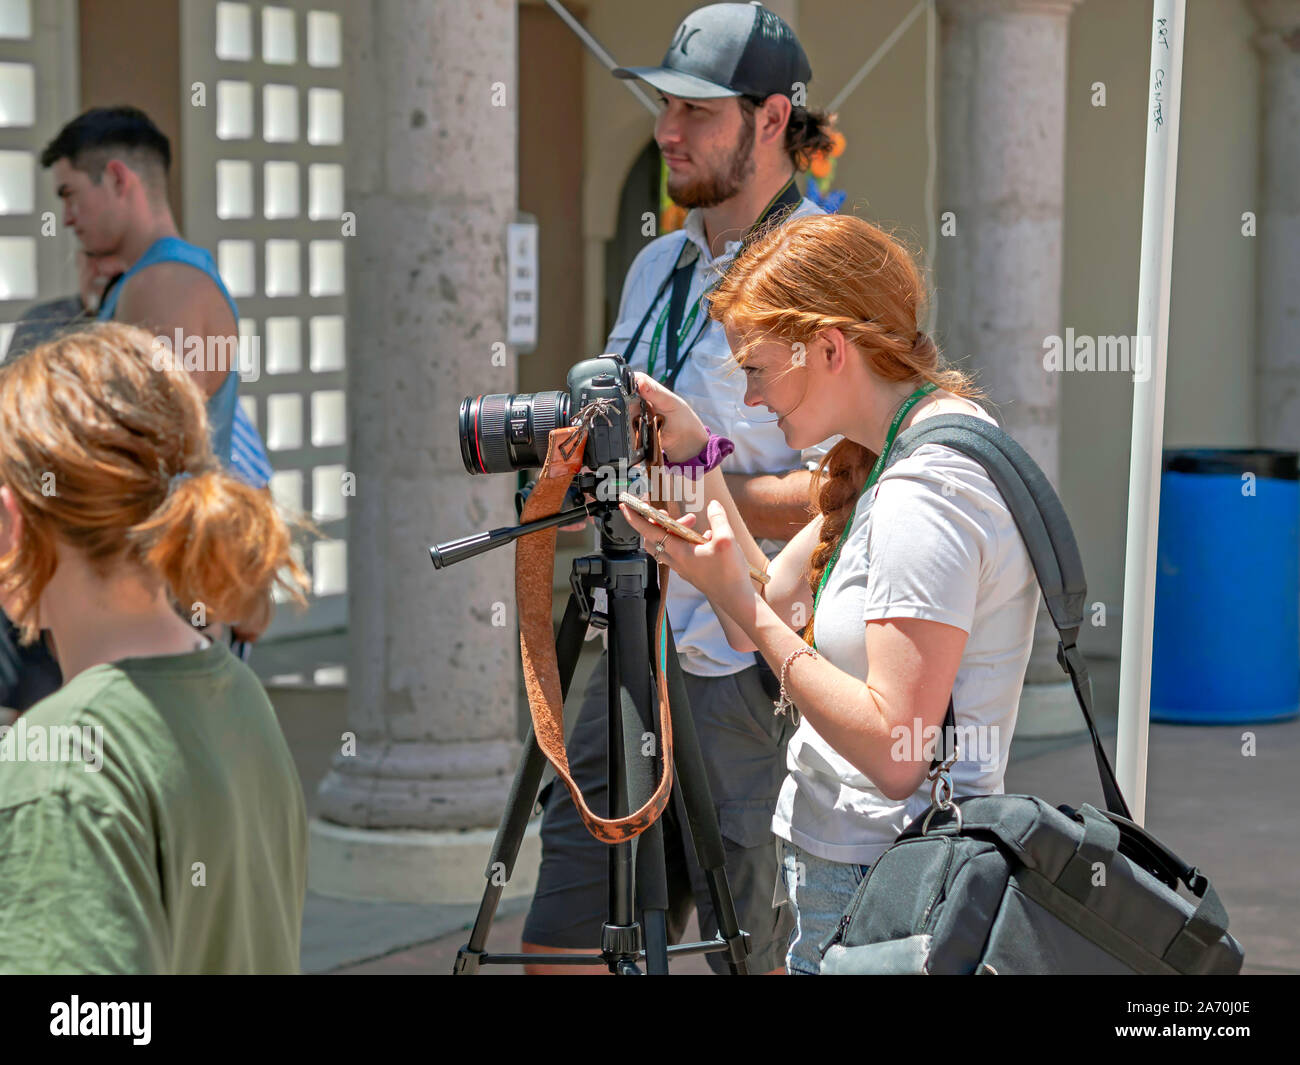 A young redhead Caucasian woman takes photographs with a tripod mounted camera at the Art Center of Corpus Christi. Arts Alive Festival 2019. Stock Photo